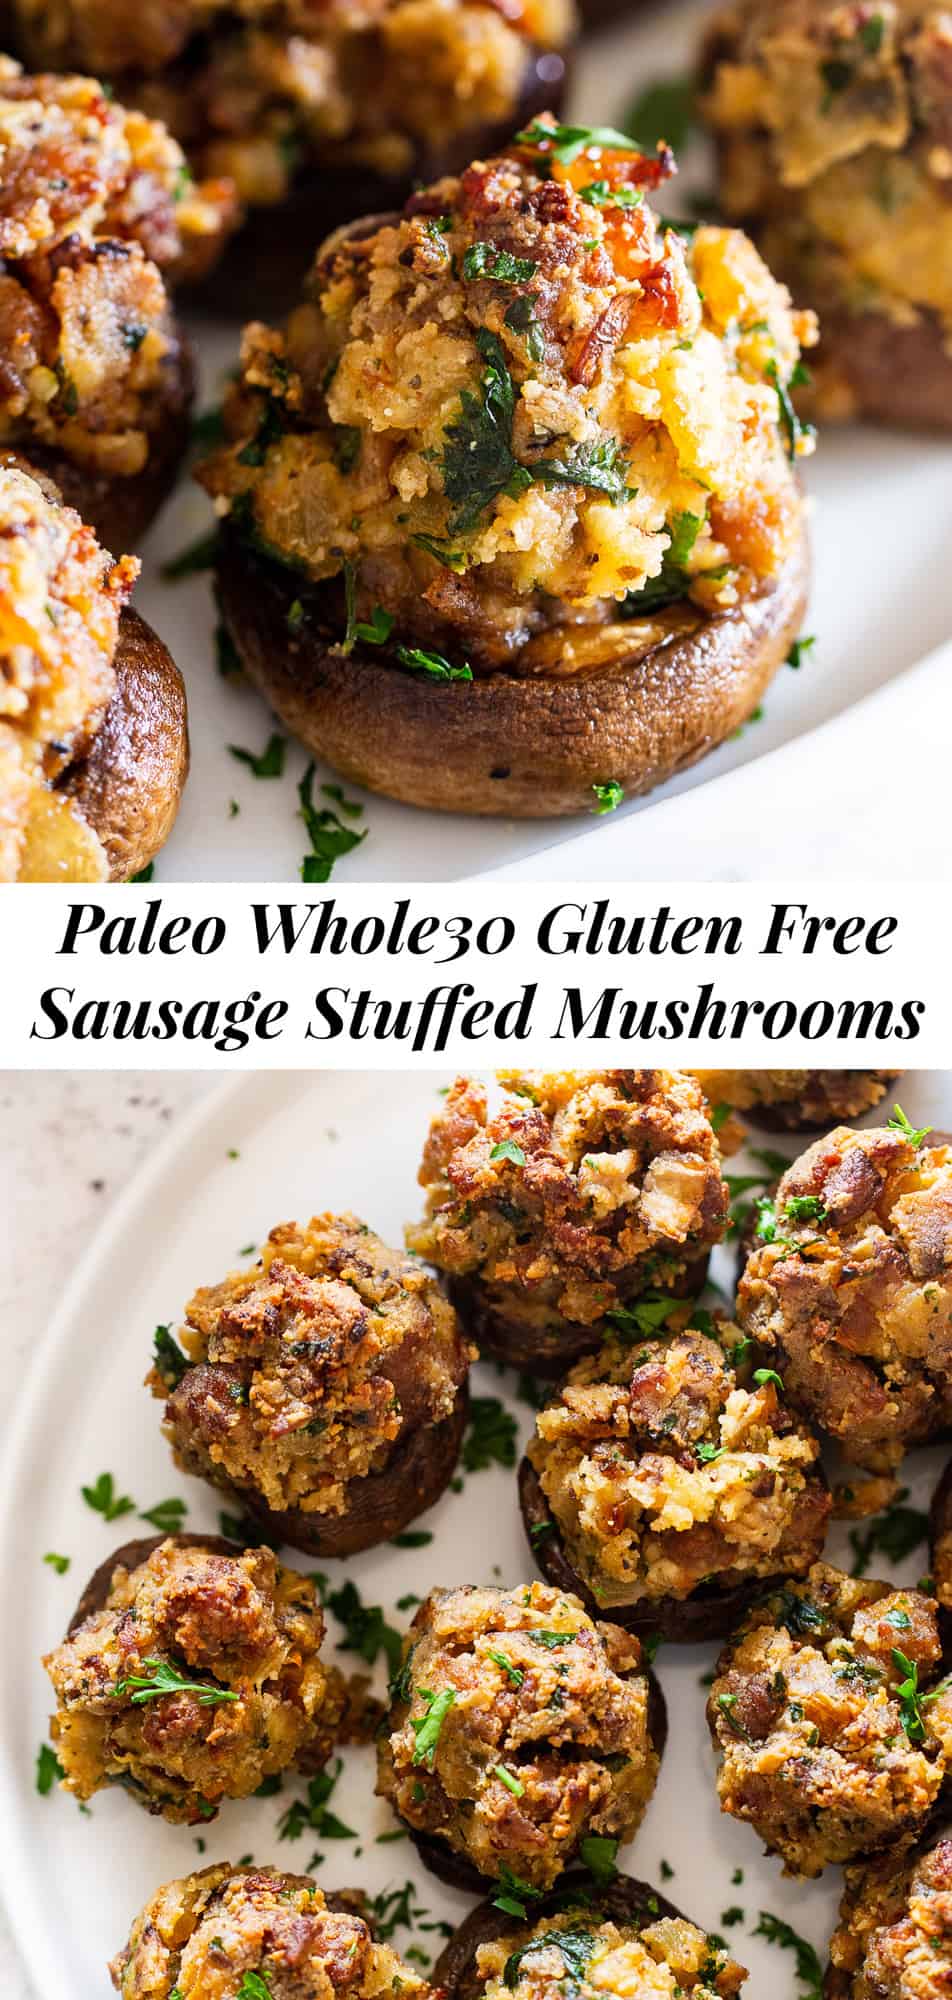 These healthier sausage stuffed mushrooms are huge on flavor but contain no dairy, gluten or grains.  They're easy to put together and make the perfect holiday appetizer or side dish!  Paleo, Whole30, keto. #paleo #cleaneating #thanksgiving #whole30 #keto